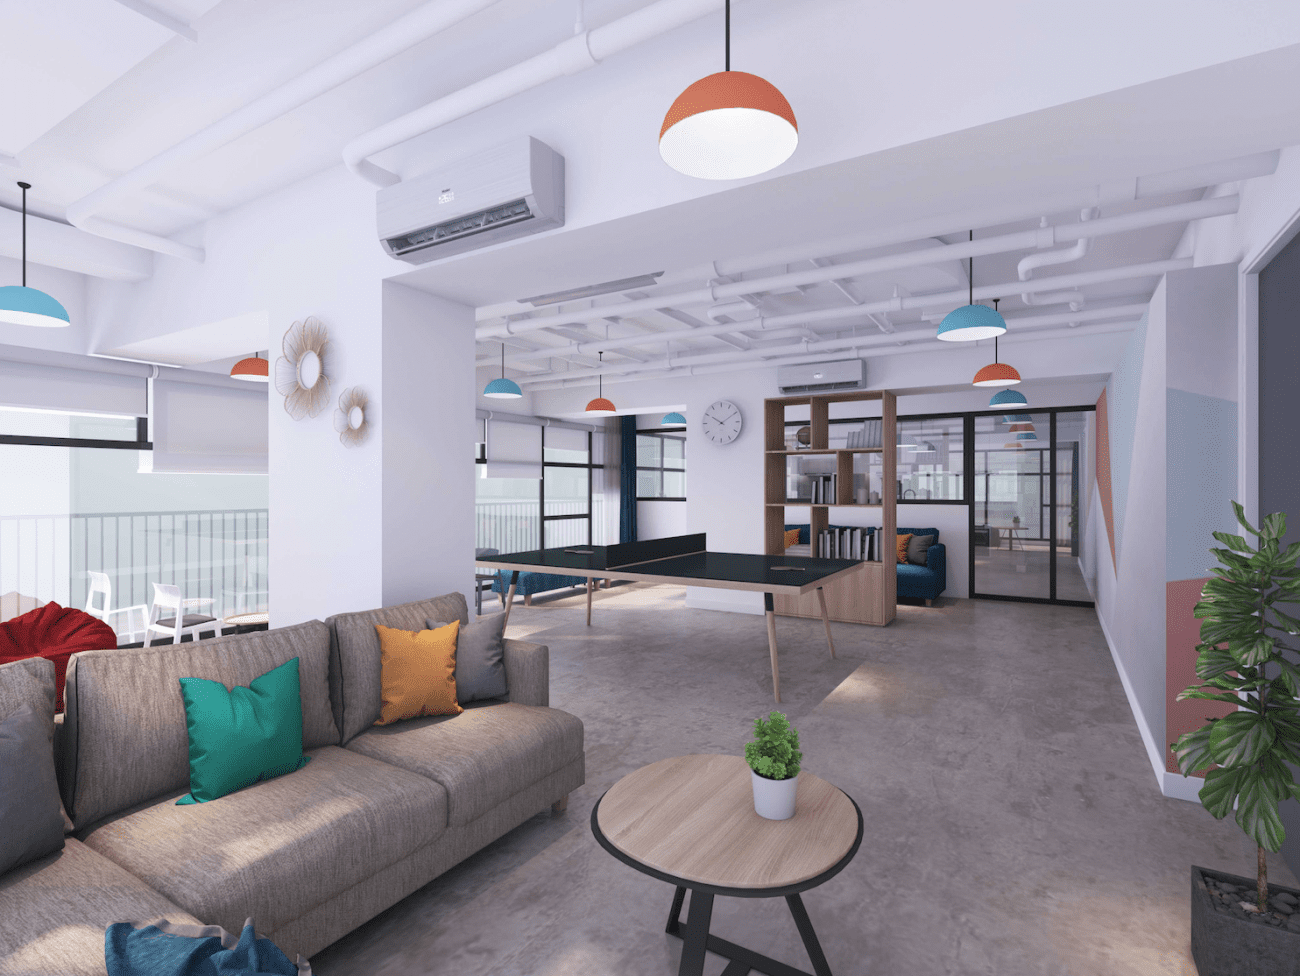 3 Of The Coolest Co-Living Spaces You Can Find in Hong Kong